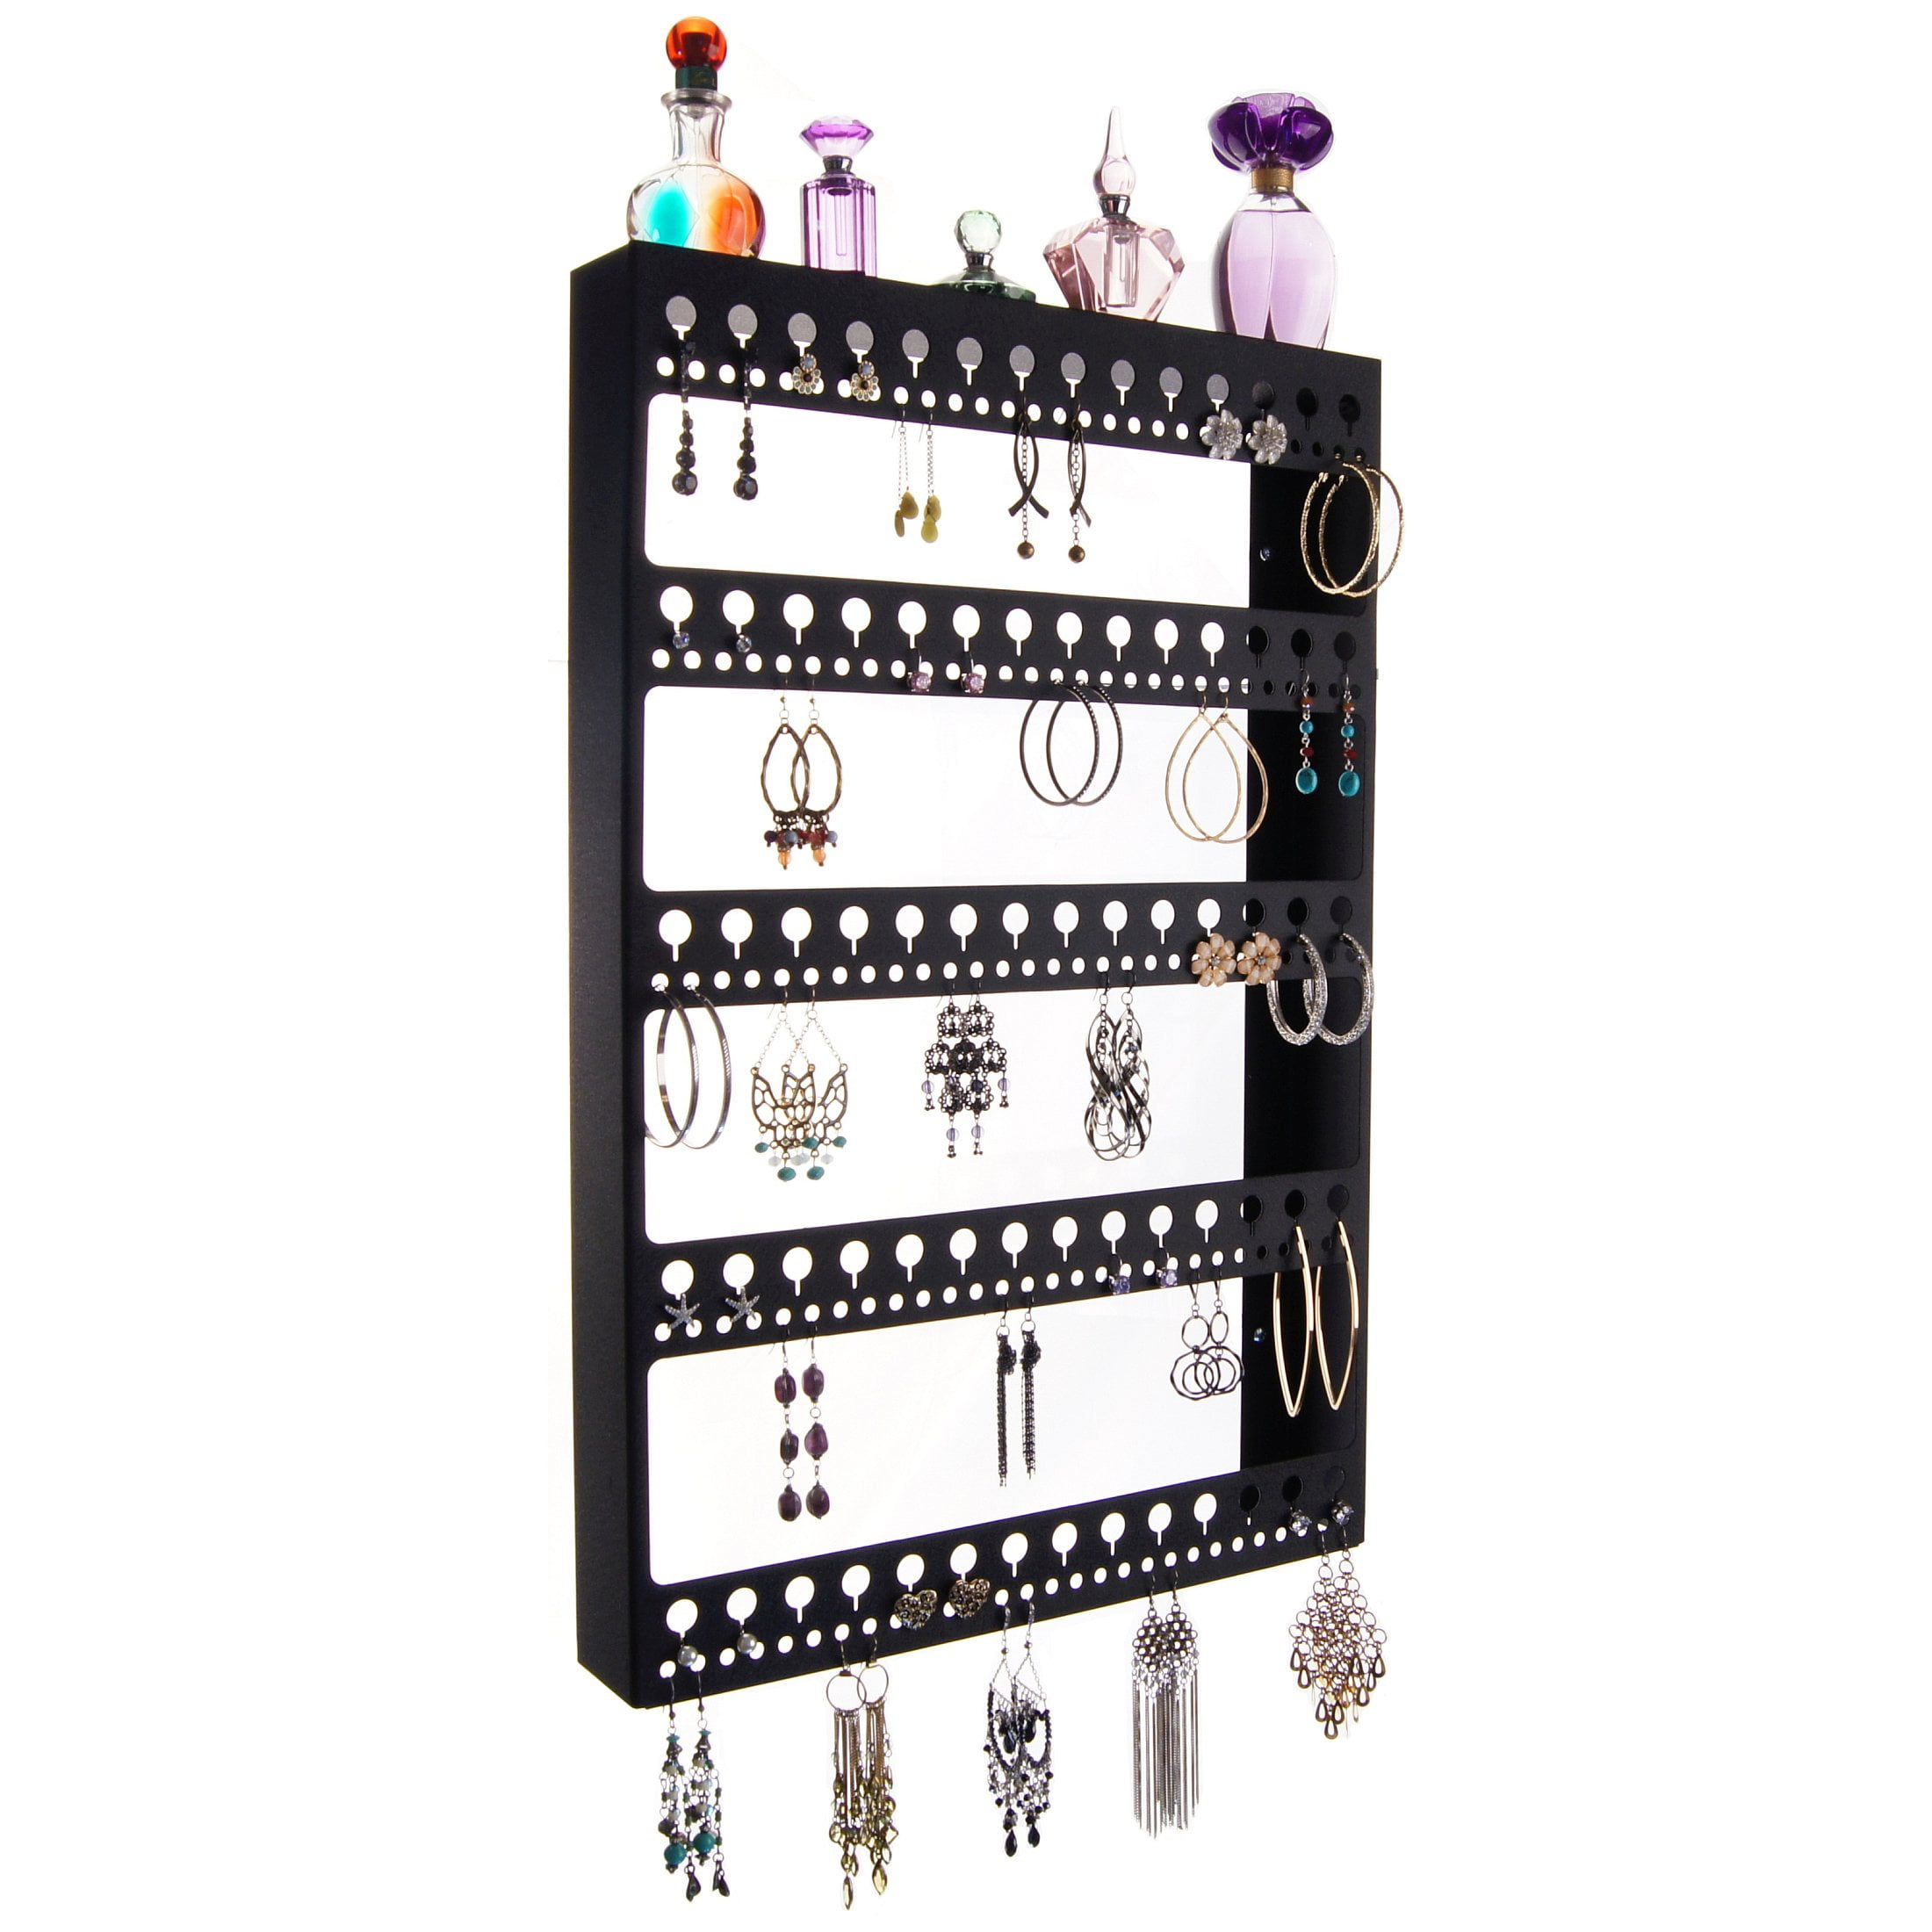 Details about   Stud Dangle Earring Holder Organizer Wall Mount Hanging Closet Jewelry Storage 